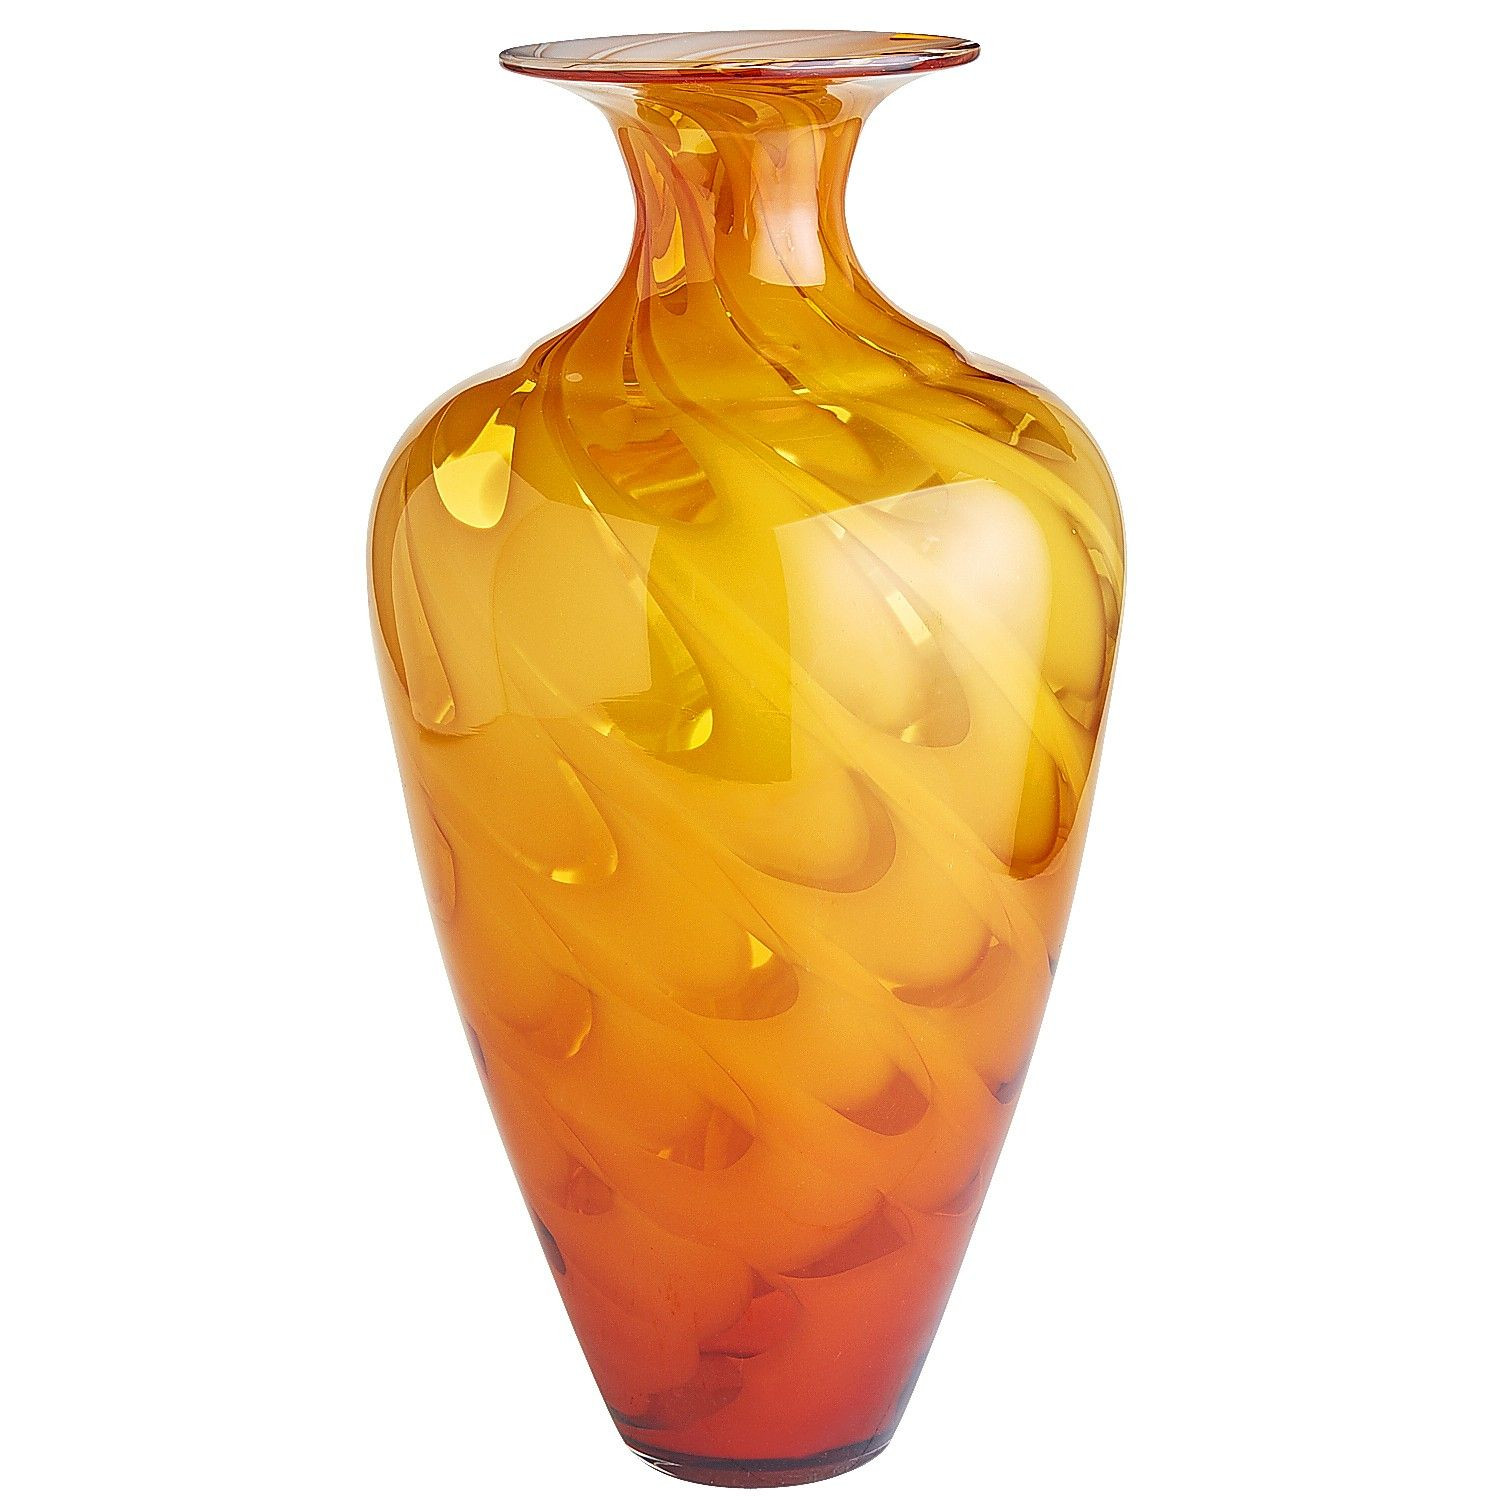 30 Lovable Amber Bubble Glass Vase 2023 free download amber bubble glass vase of art glass swirl tall vase amber home garden decor intended for art glass swirl tall vase amber